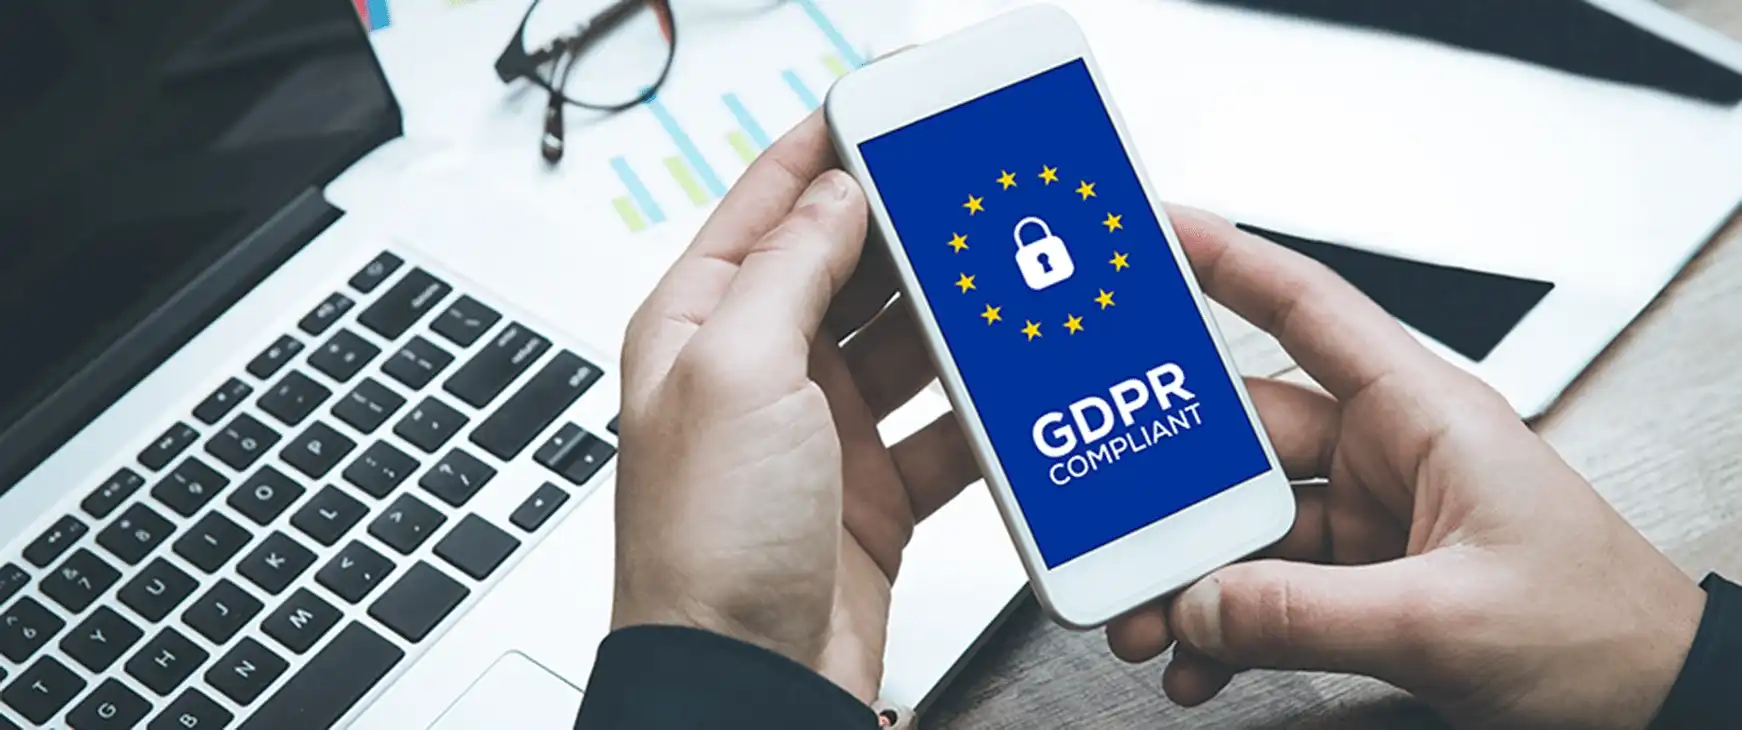 Hospitality businesses, GDPR and hospitality – are you still risking a massive fine? Our free guide will help, NFS Technology